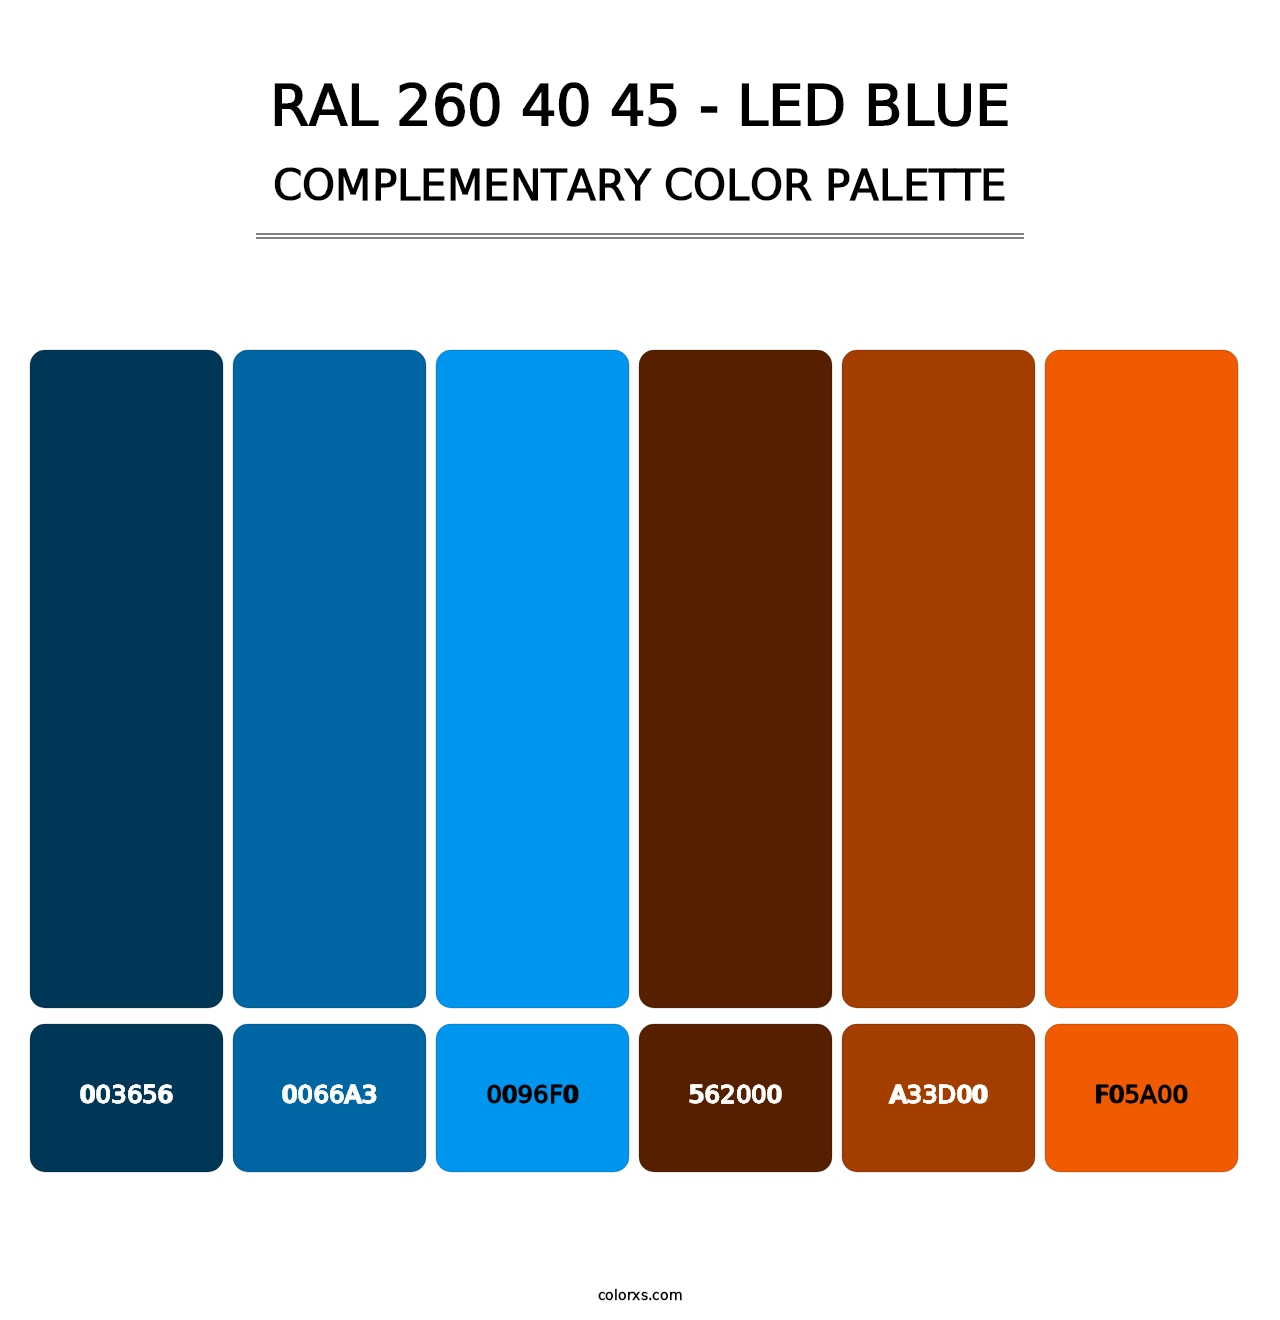 RAL 260 40 45 - LED Blue - Complementary Color Palette